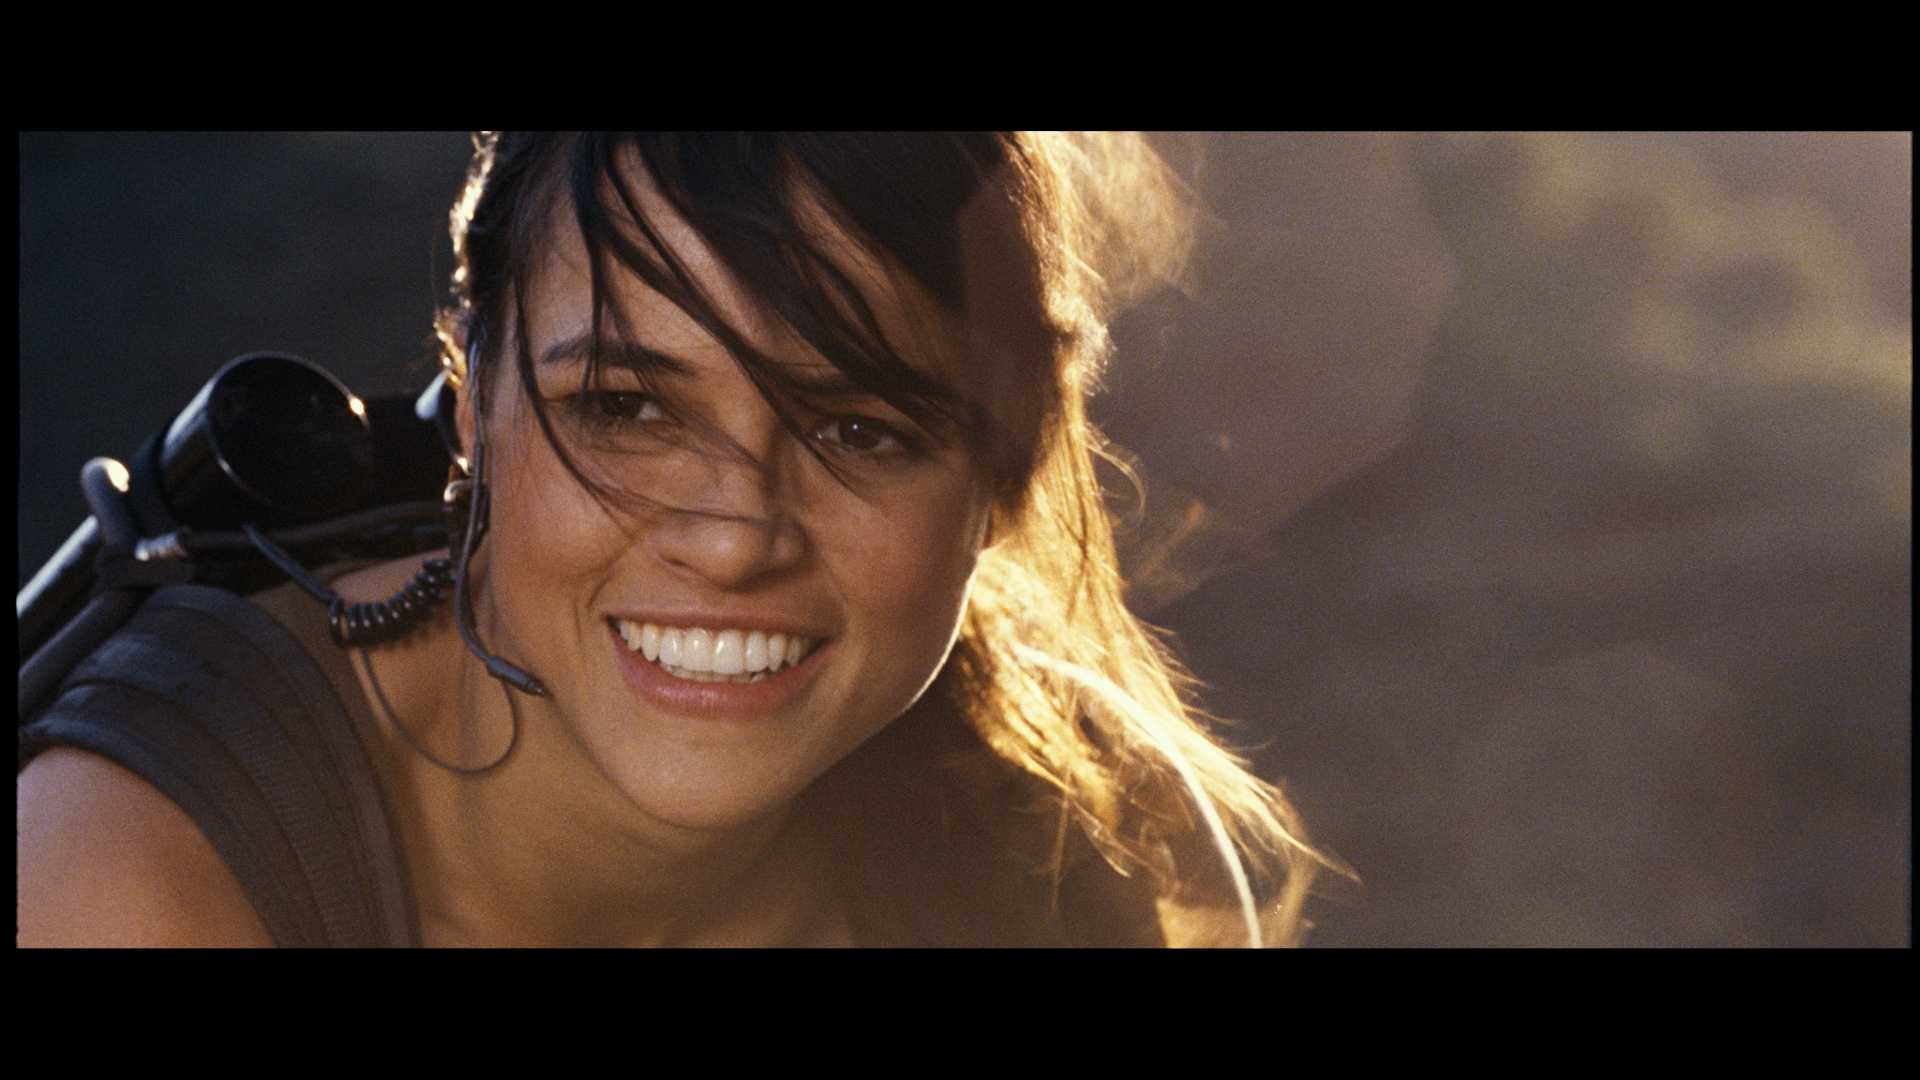 Michelle Rodriguez Fast And Furious Wallpaper Wpt7606945 - Fast And Furious Female Character , HD Wallpaper & Backgrounds